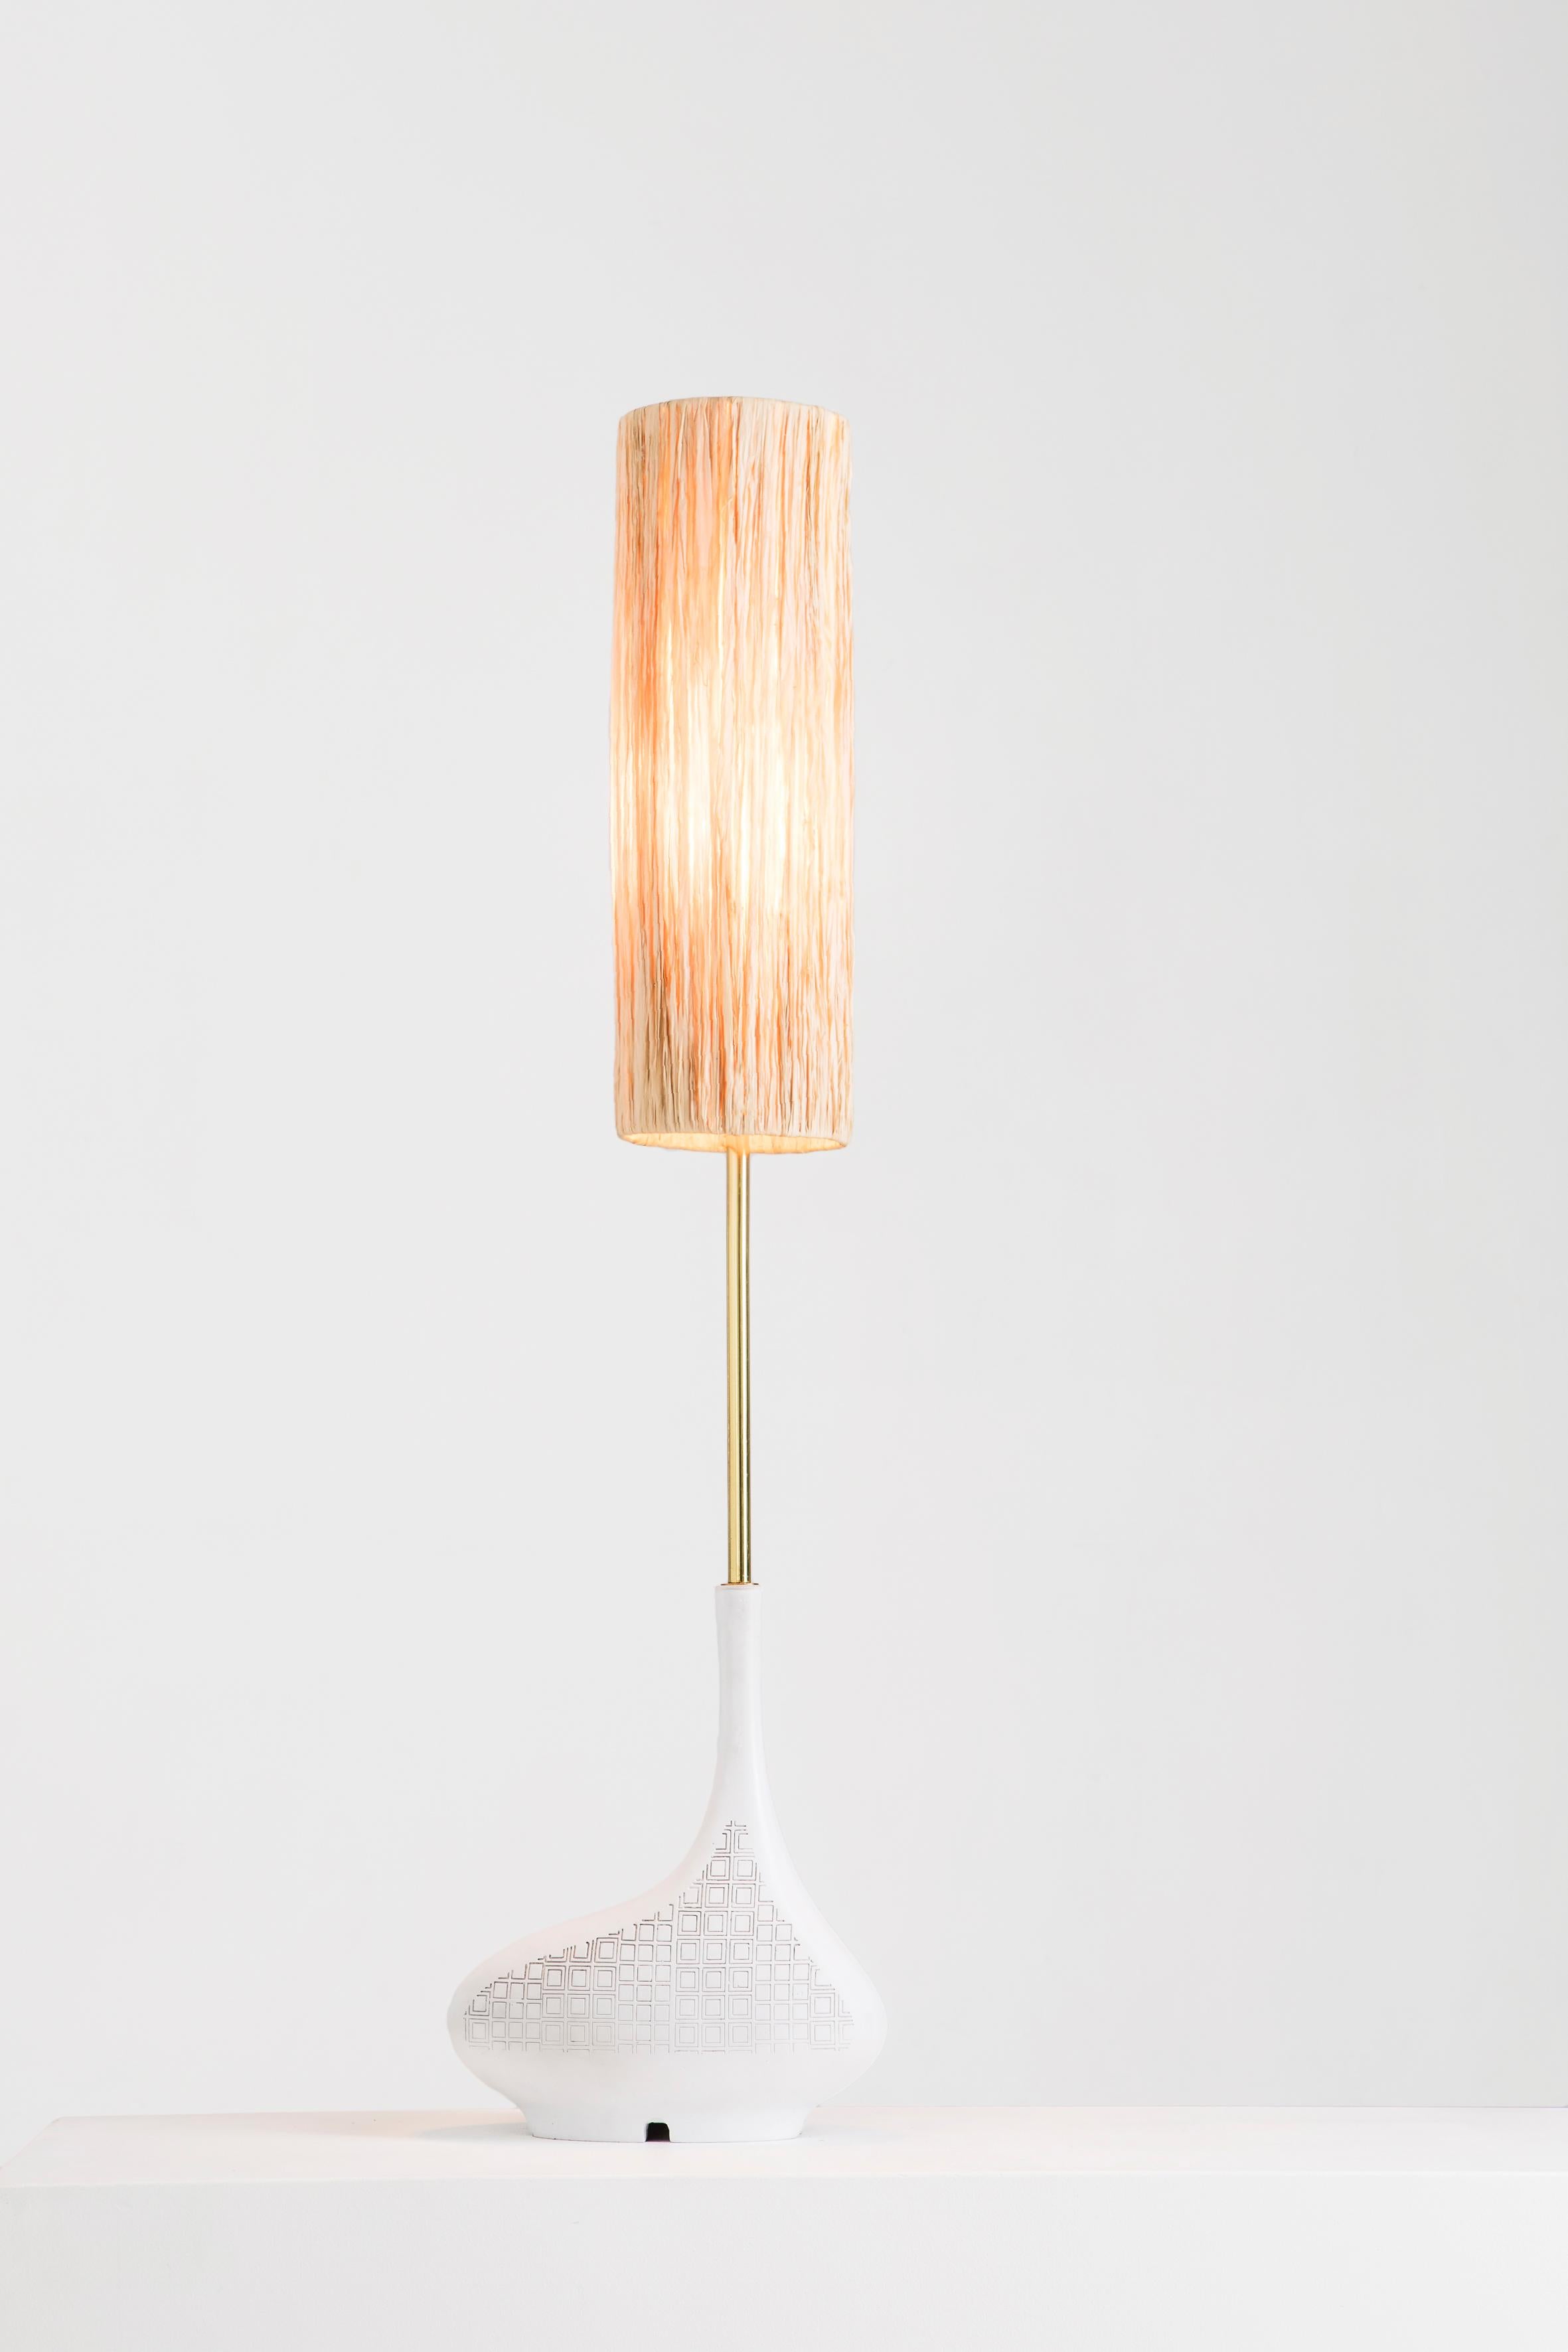 Pod single table lamp by Egg Designs
Dimensions: 30 L X 30 D X 58 H cm
Materials: composite casting, brass, raffia.

Founded by South Africans and life partners, Greg and Roche Dry - Egg is a unique perspective in contemporary furniture inspired